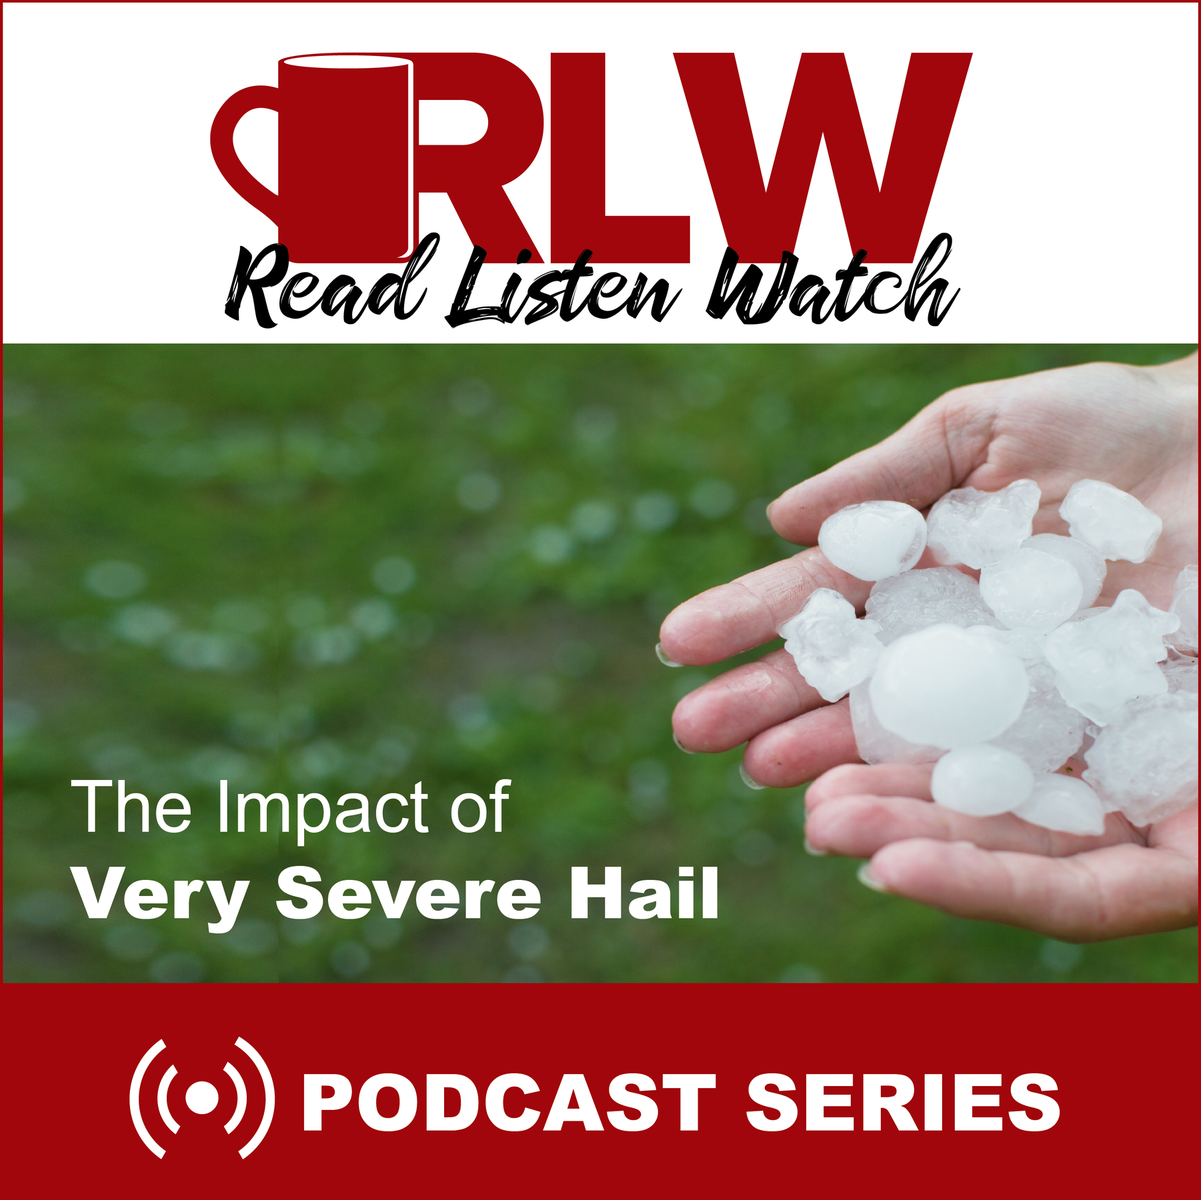 The Impact of Very Severe Hail